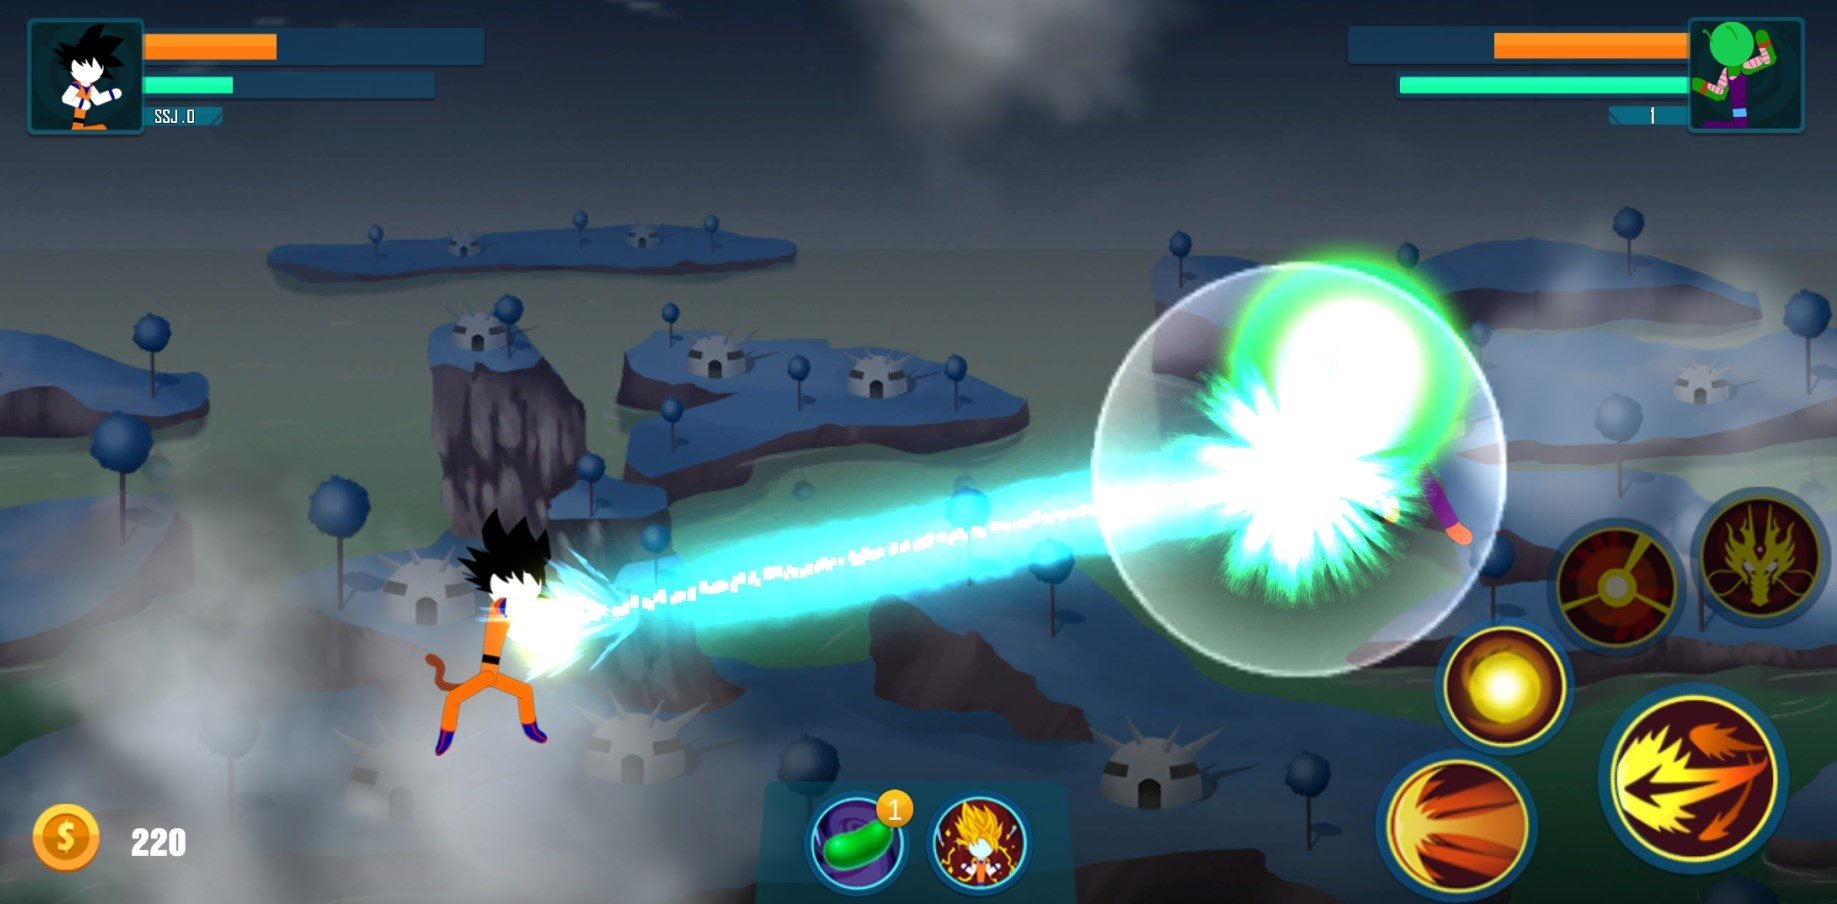 dragon ball z fighting games for android free download